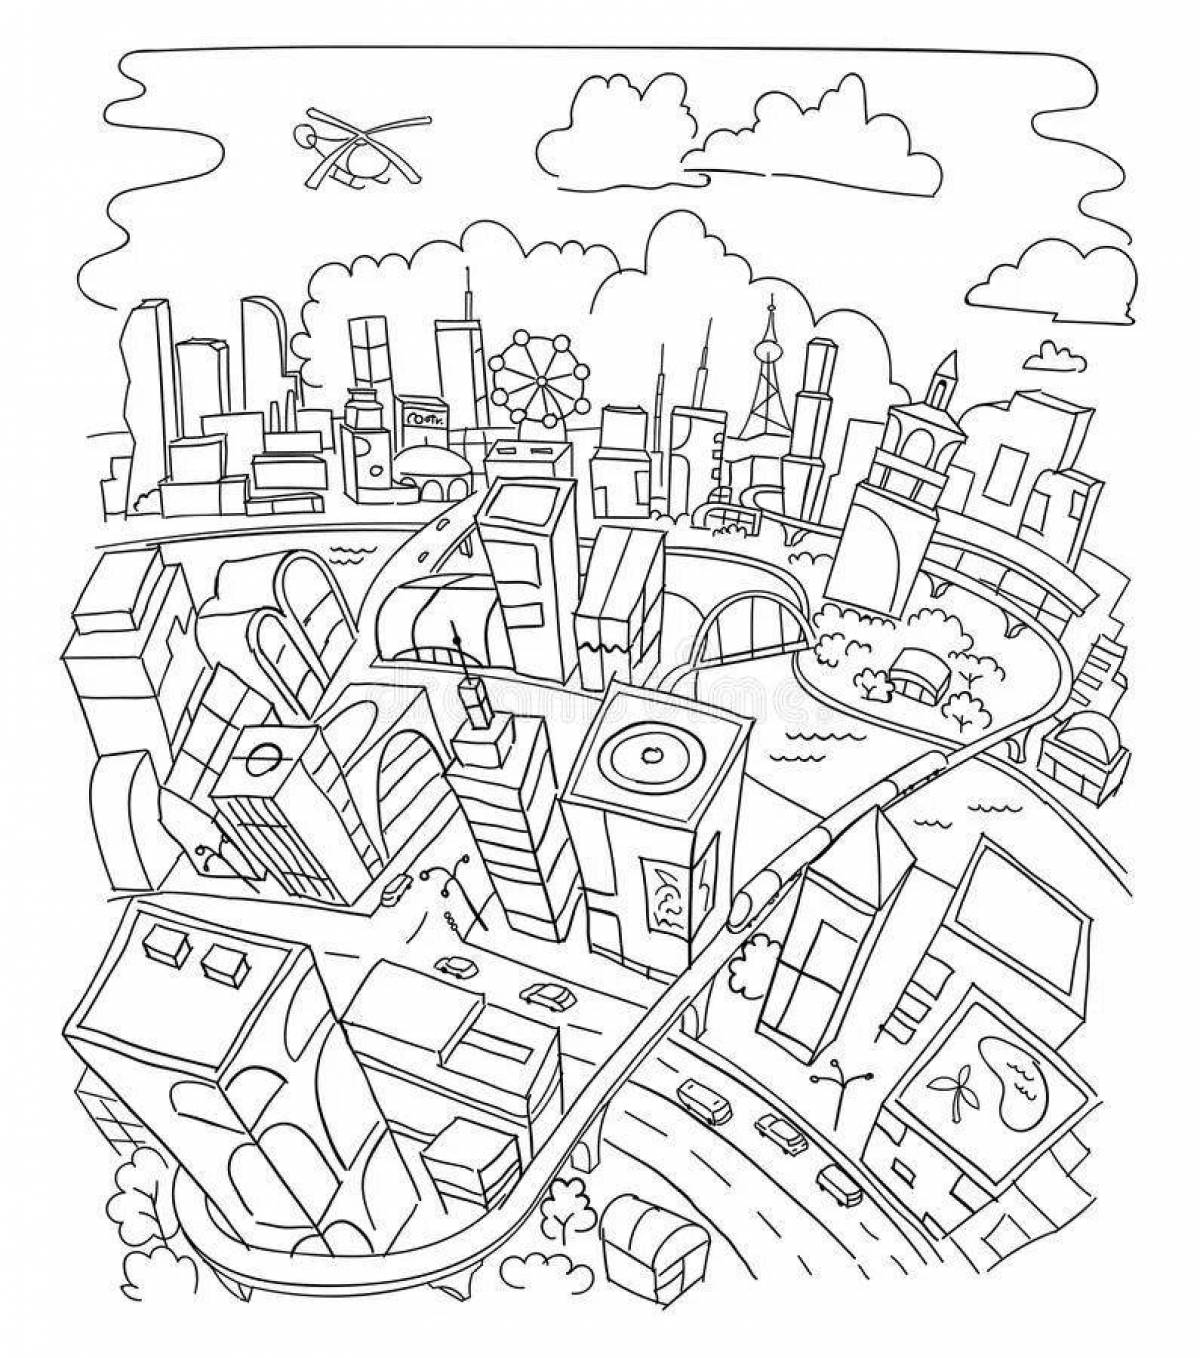 Colorful city of the future coloring book